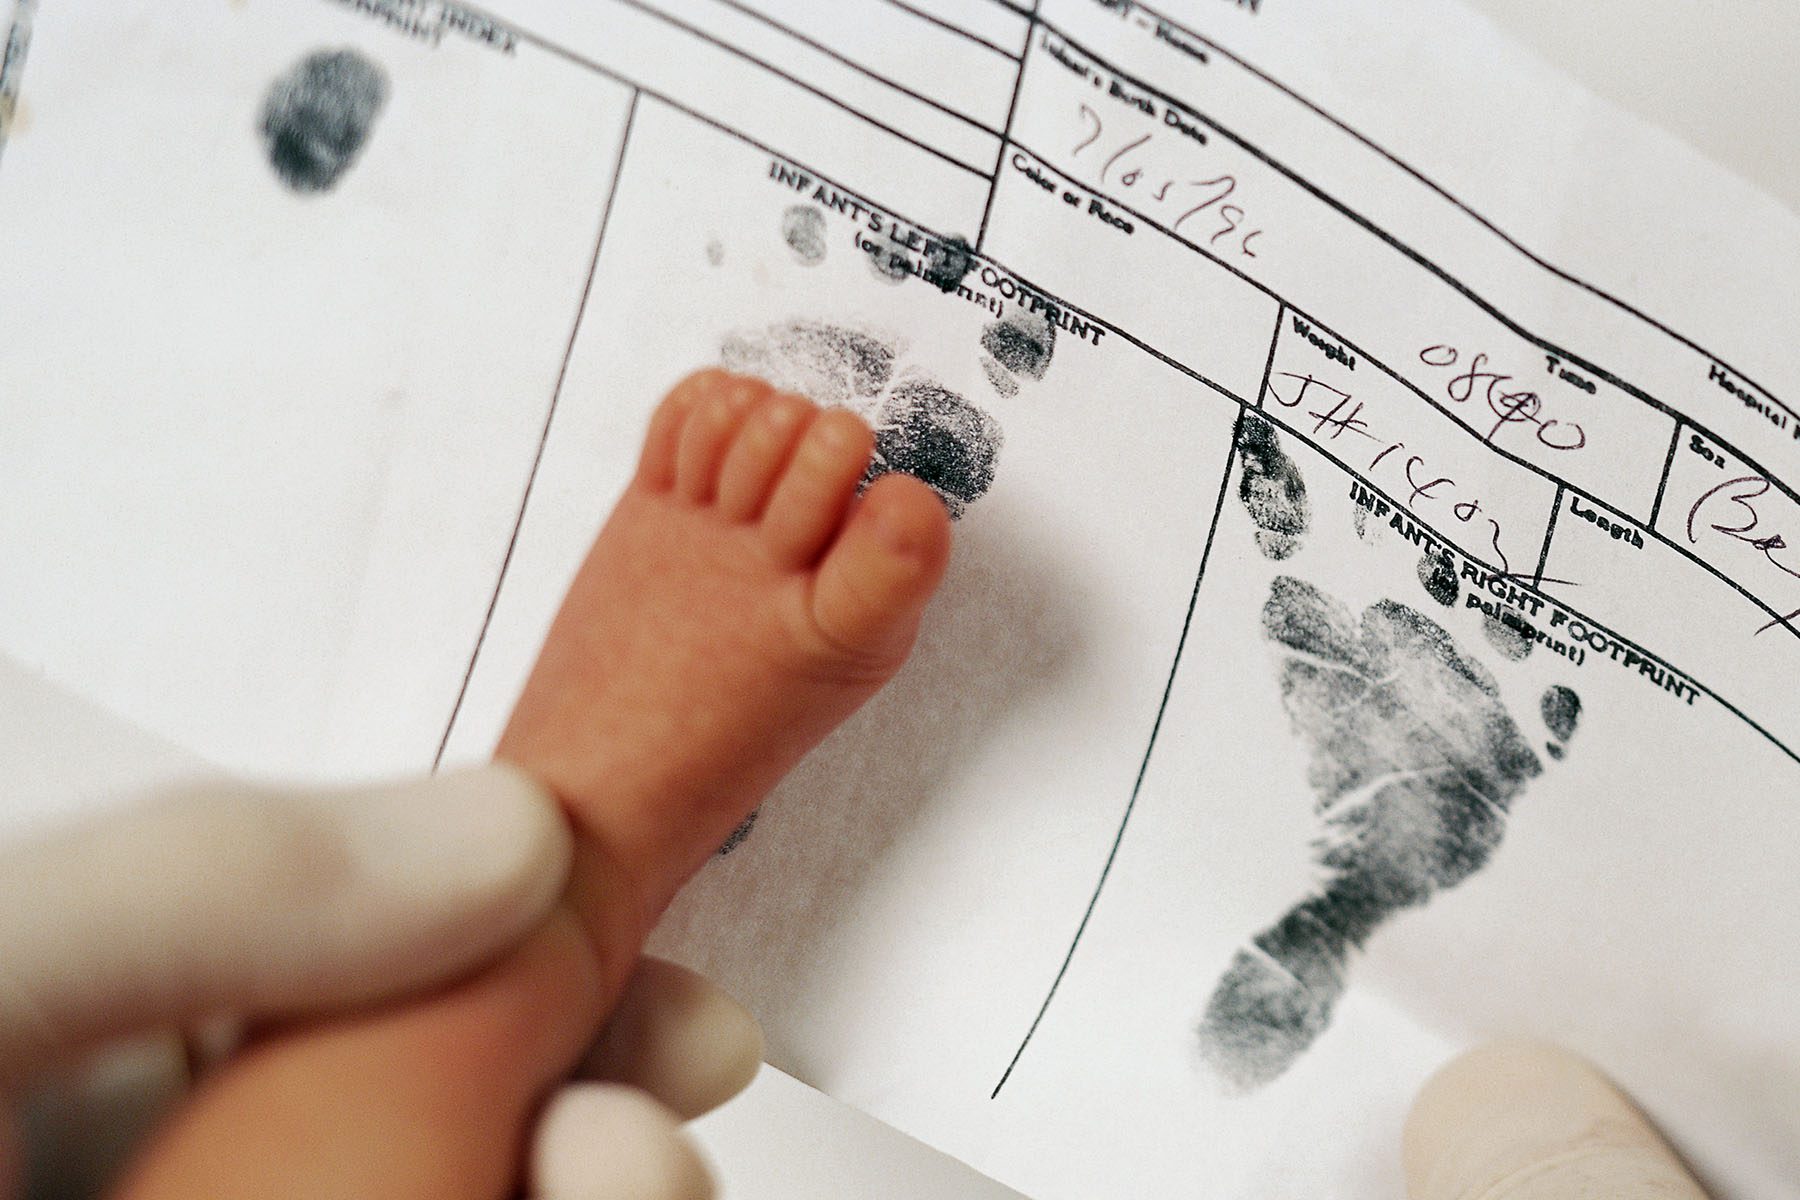 Footprint of a child on a birth certificate.